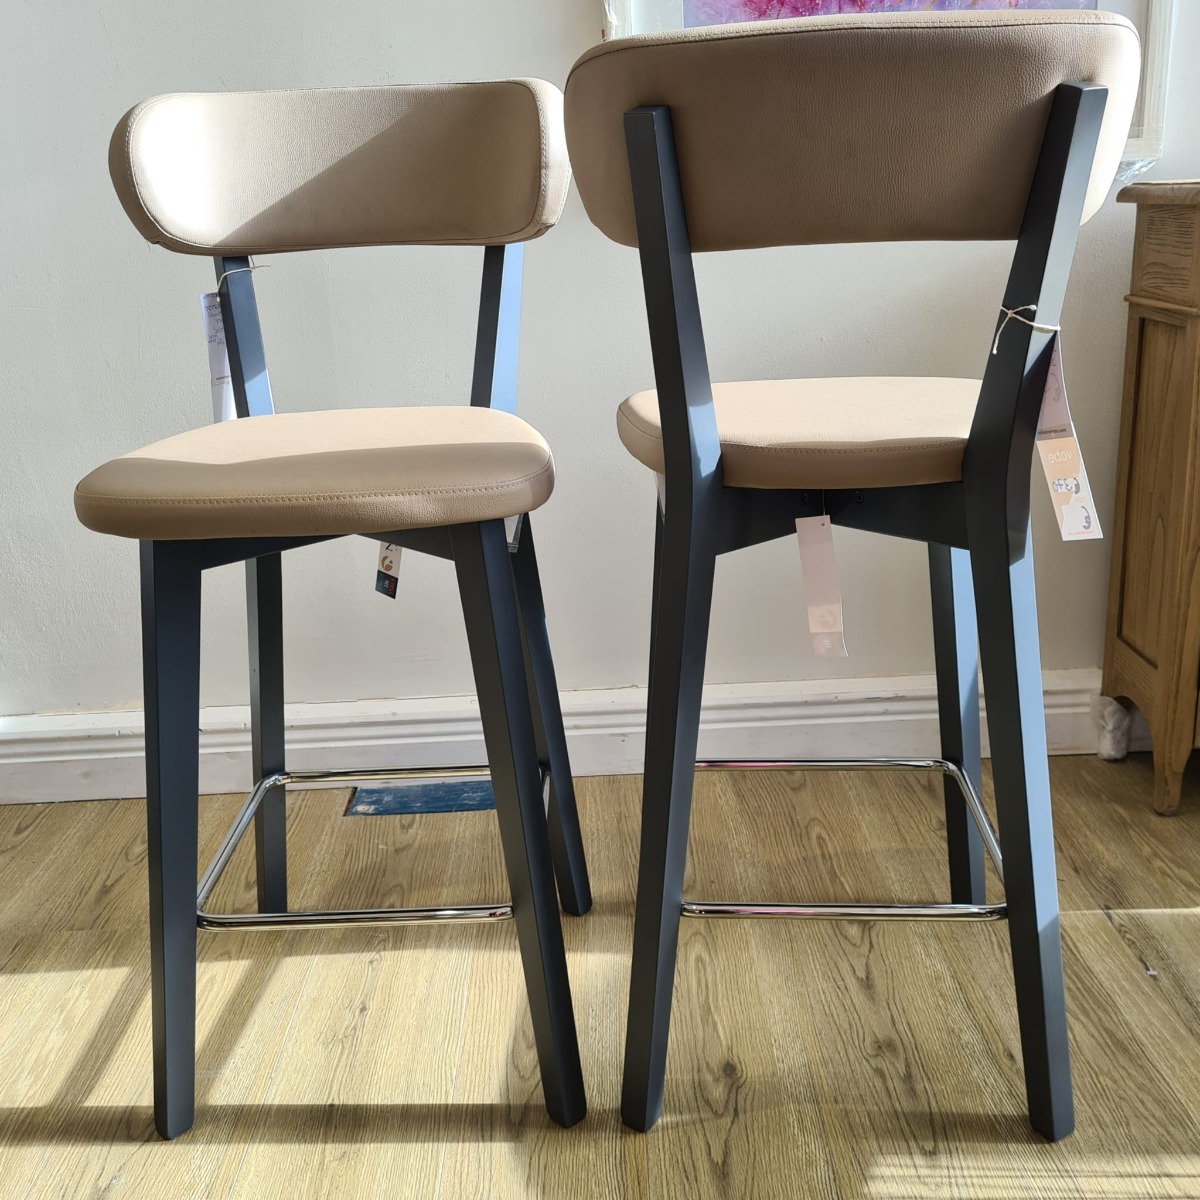 2 Floor Model Peter Counter Stools in Taupe 